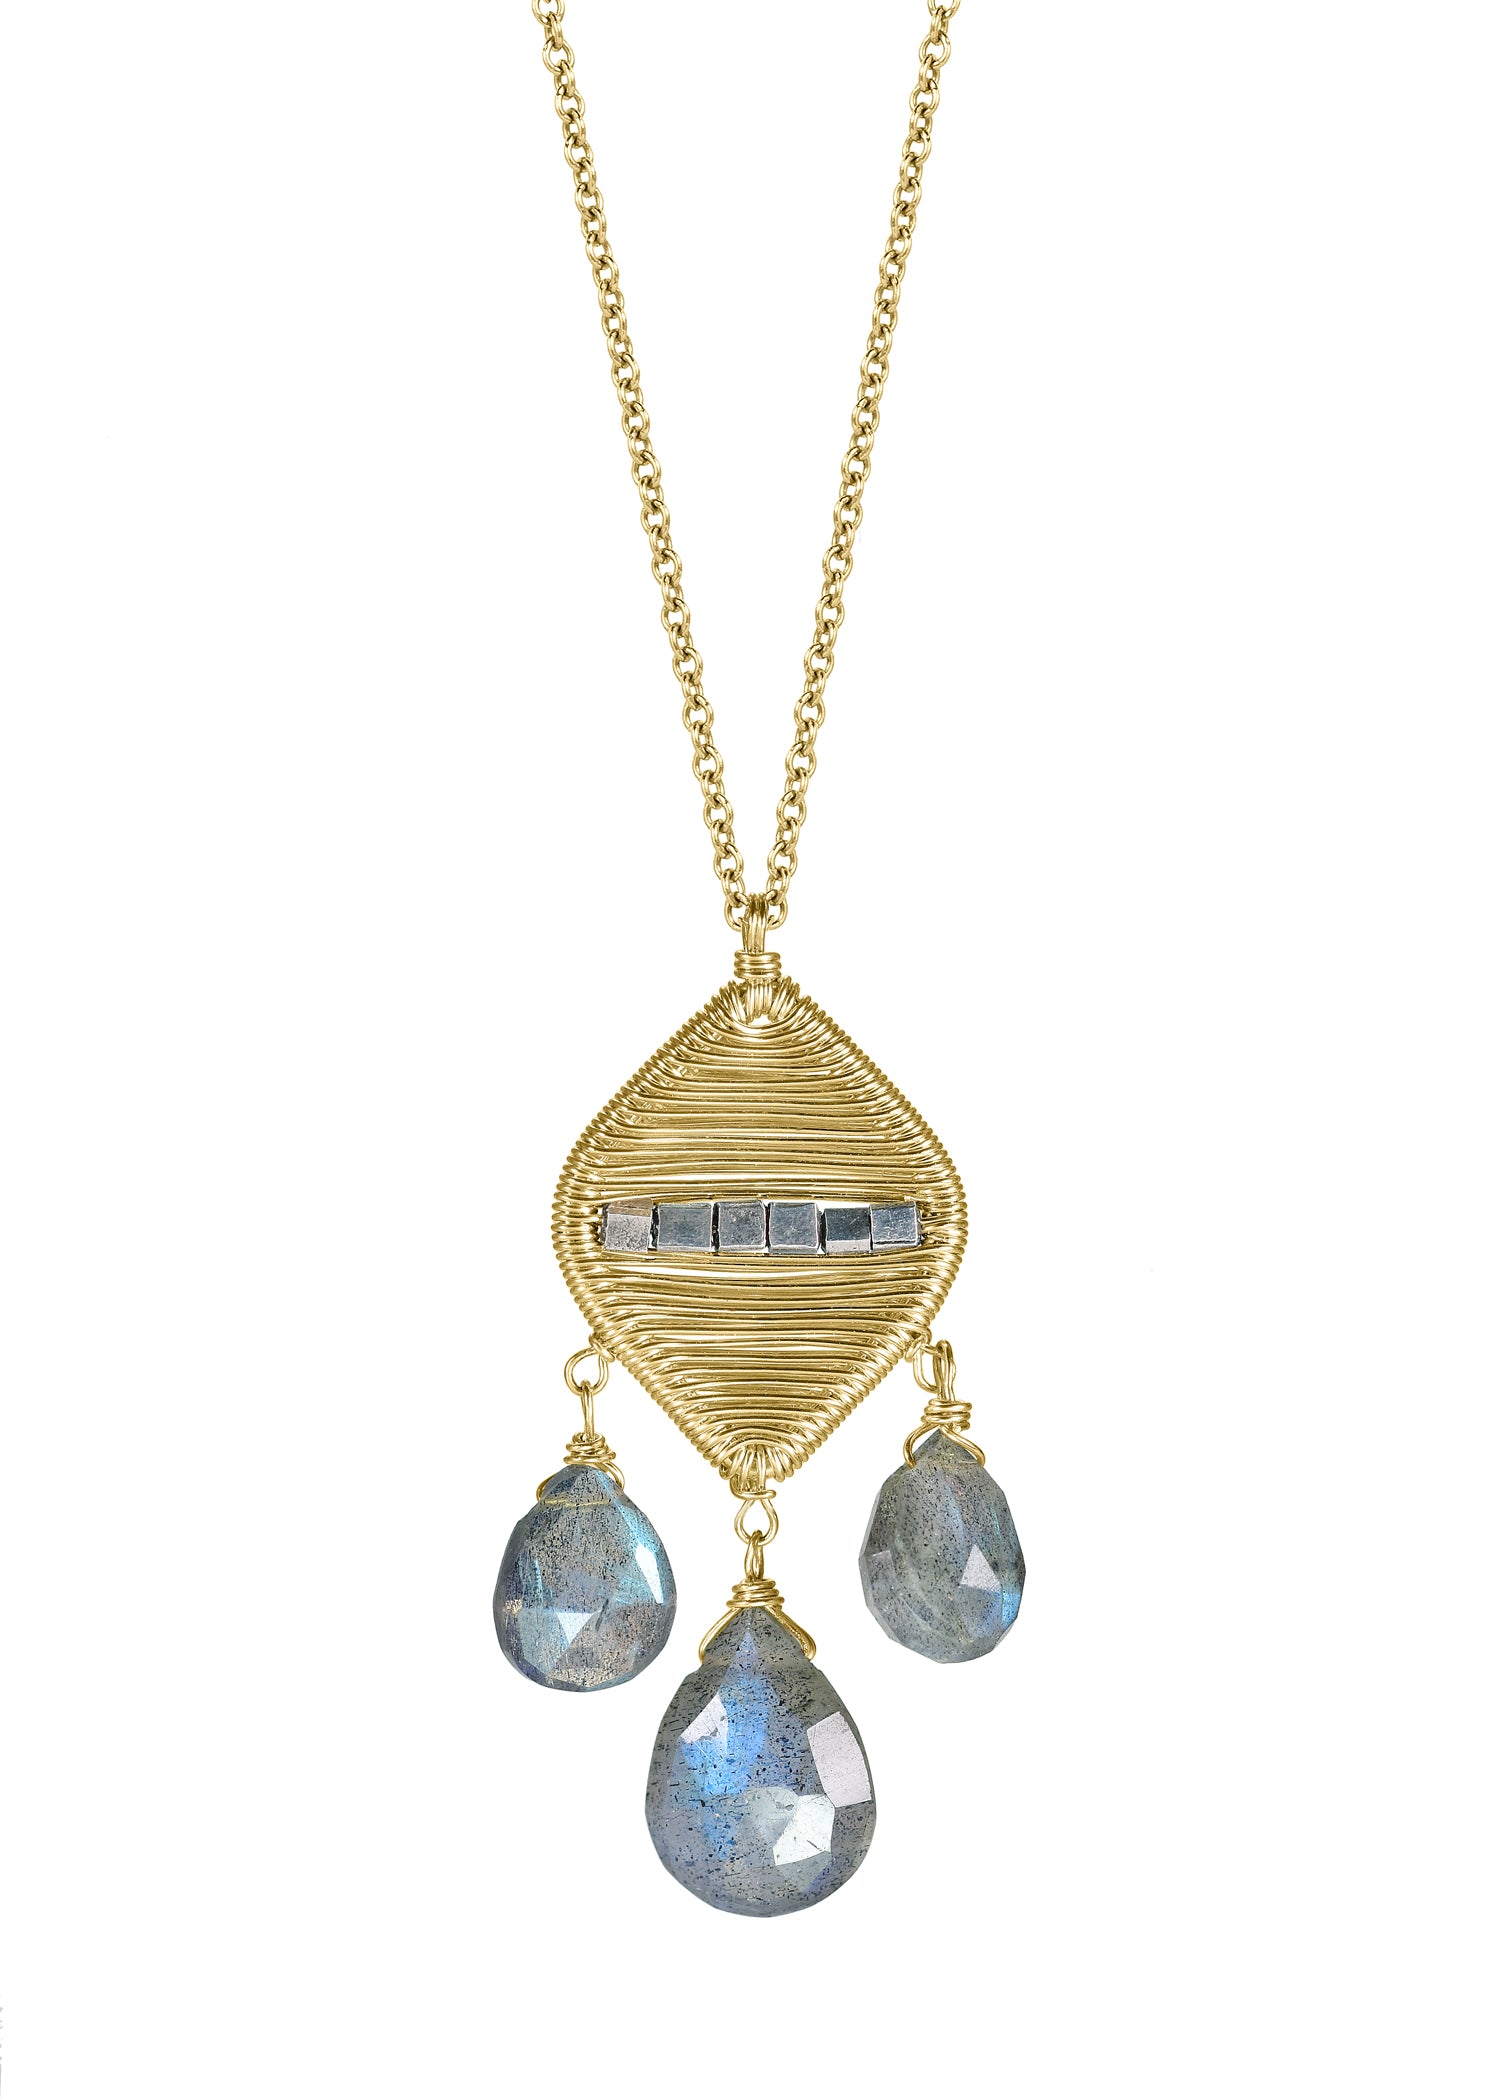 Labradorite 14k gold fill Sterling silver Mixed metal Necklace measures 16-1/2" in length Pendant measures 1-1/4" in length and 1/2" in width at the widest point Handmade in our Los Angeles studio